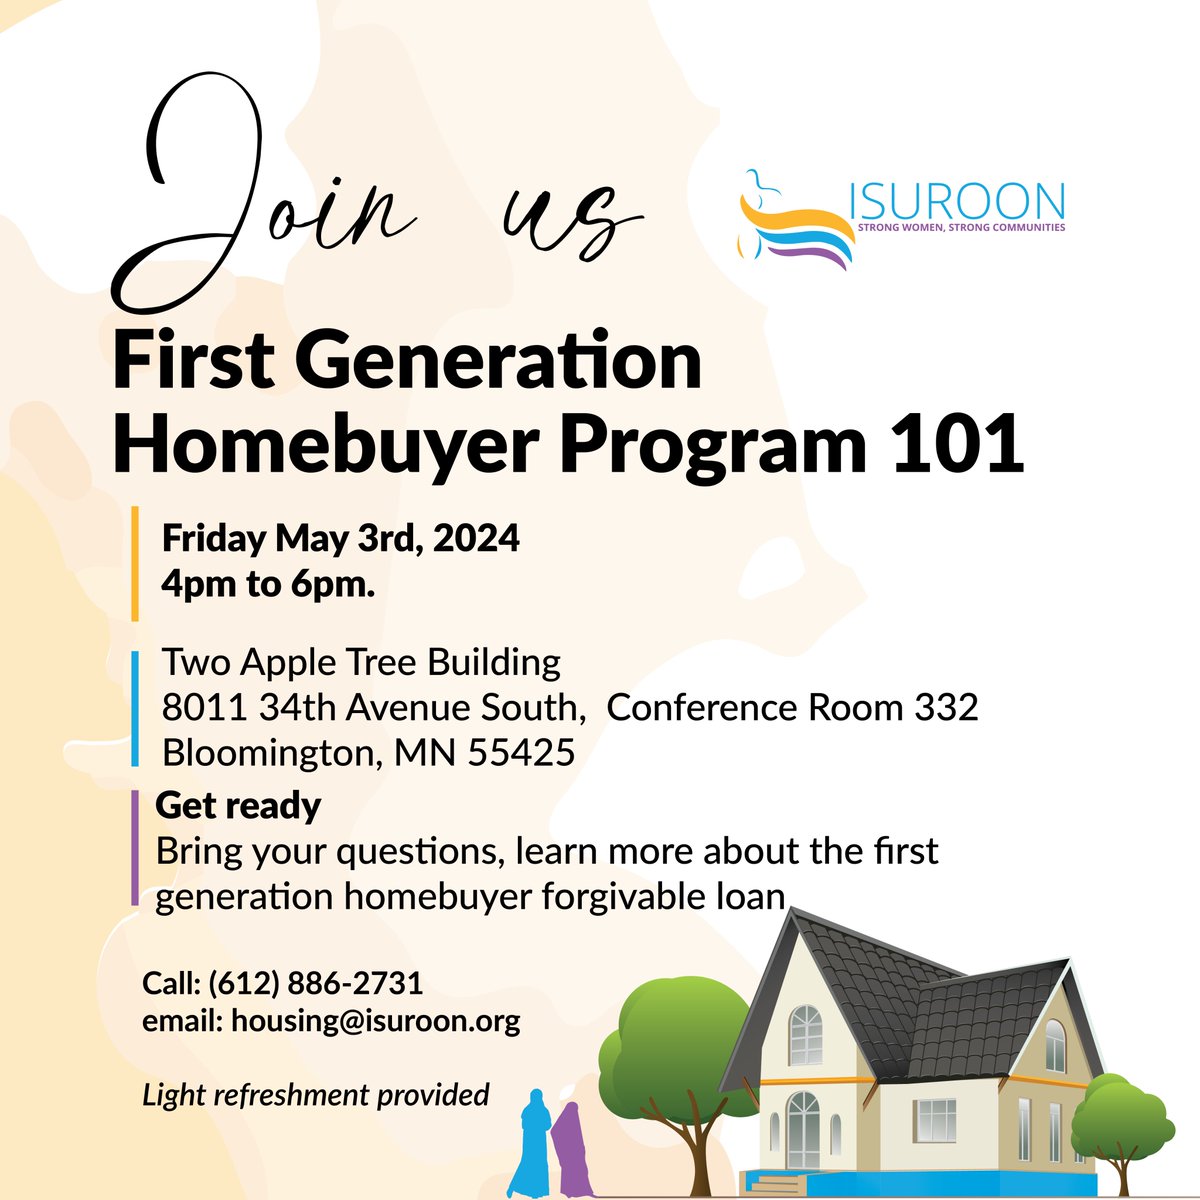 2 Days left! Bring your questions! learn more about the first-generation homebuyer forgivable loan! Please join us on Friday May 3rd from 4-6PM at the Two Apple Tree Buiilding, 8011 34th Ave s, Bloomington, MN 55425 in the conference room 332 #FirstGeneration ##Homebuyer